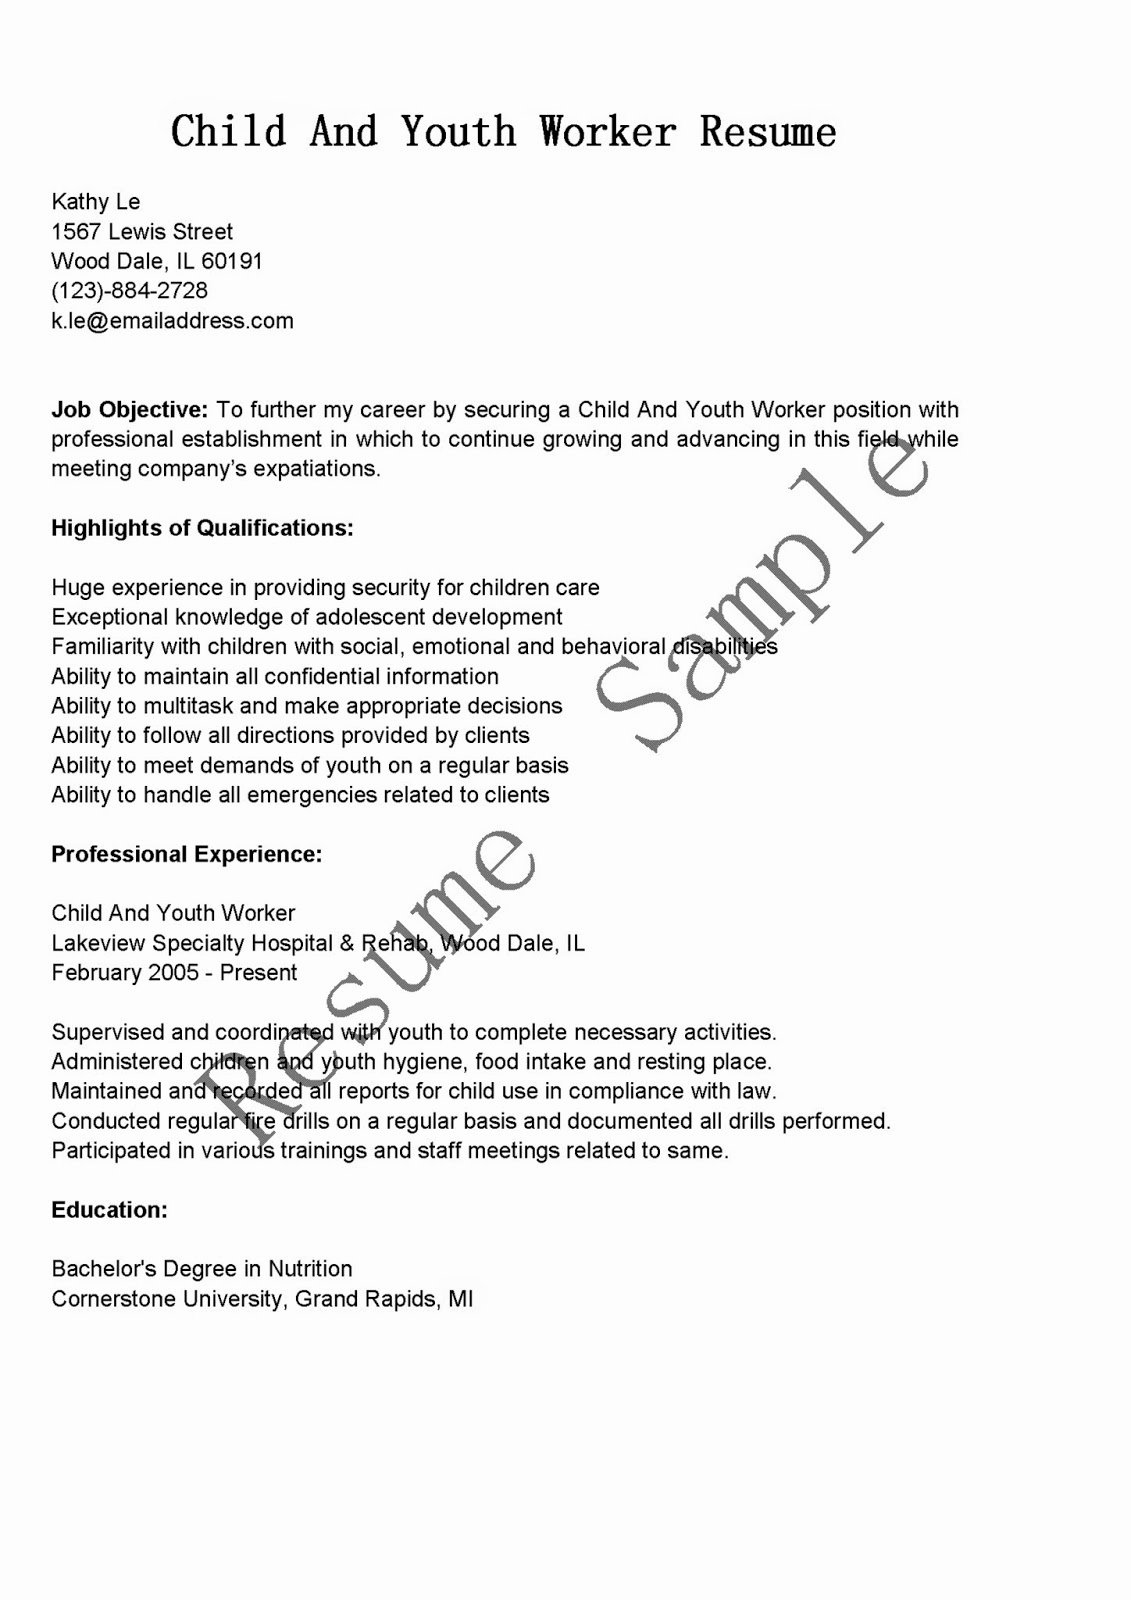 Resume Samples Child and Youth Worker Resume Sample